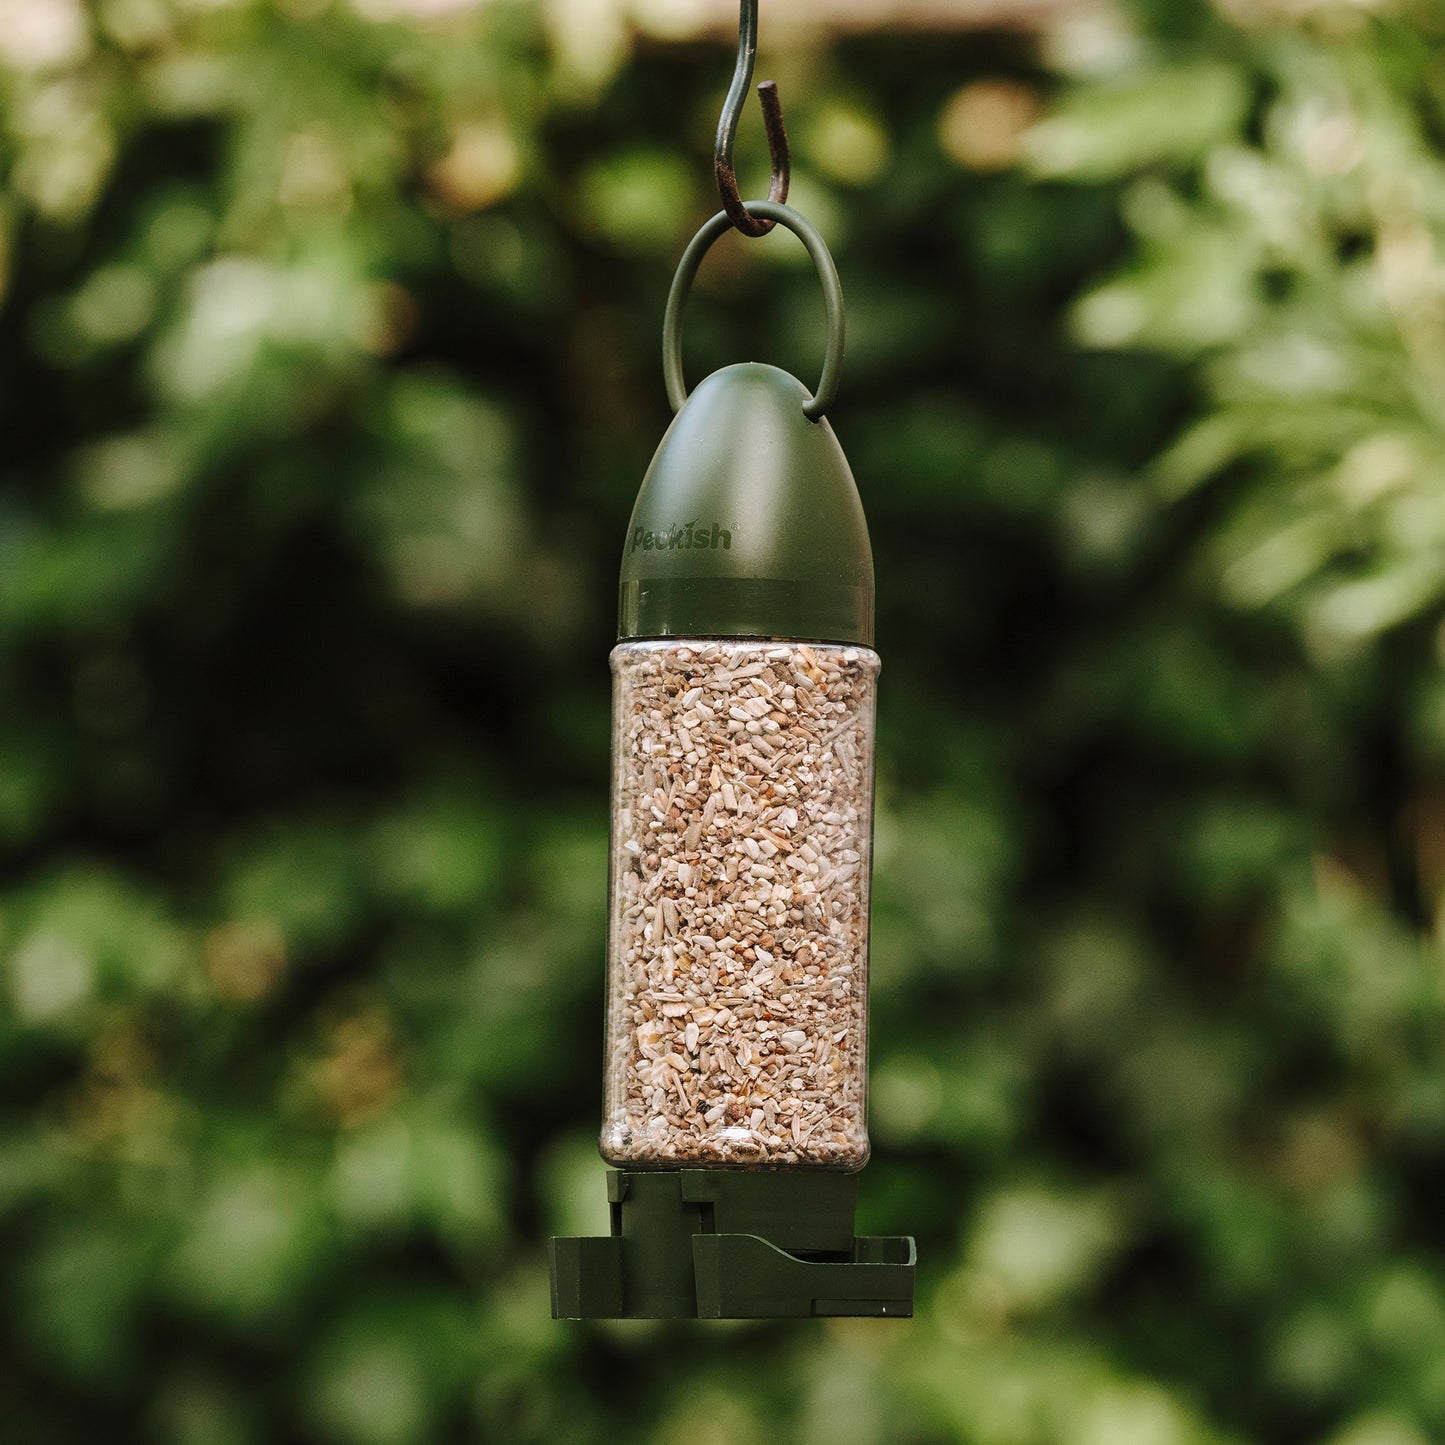 Peckish Complete Seed Mix Filled Feeder hanging in tree